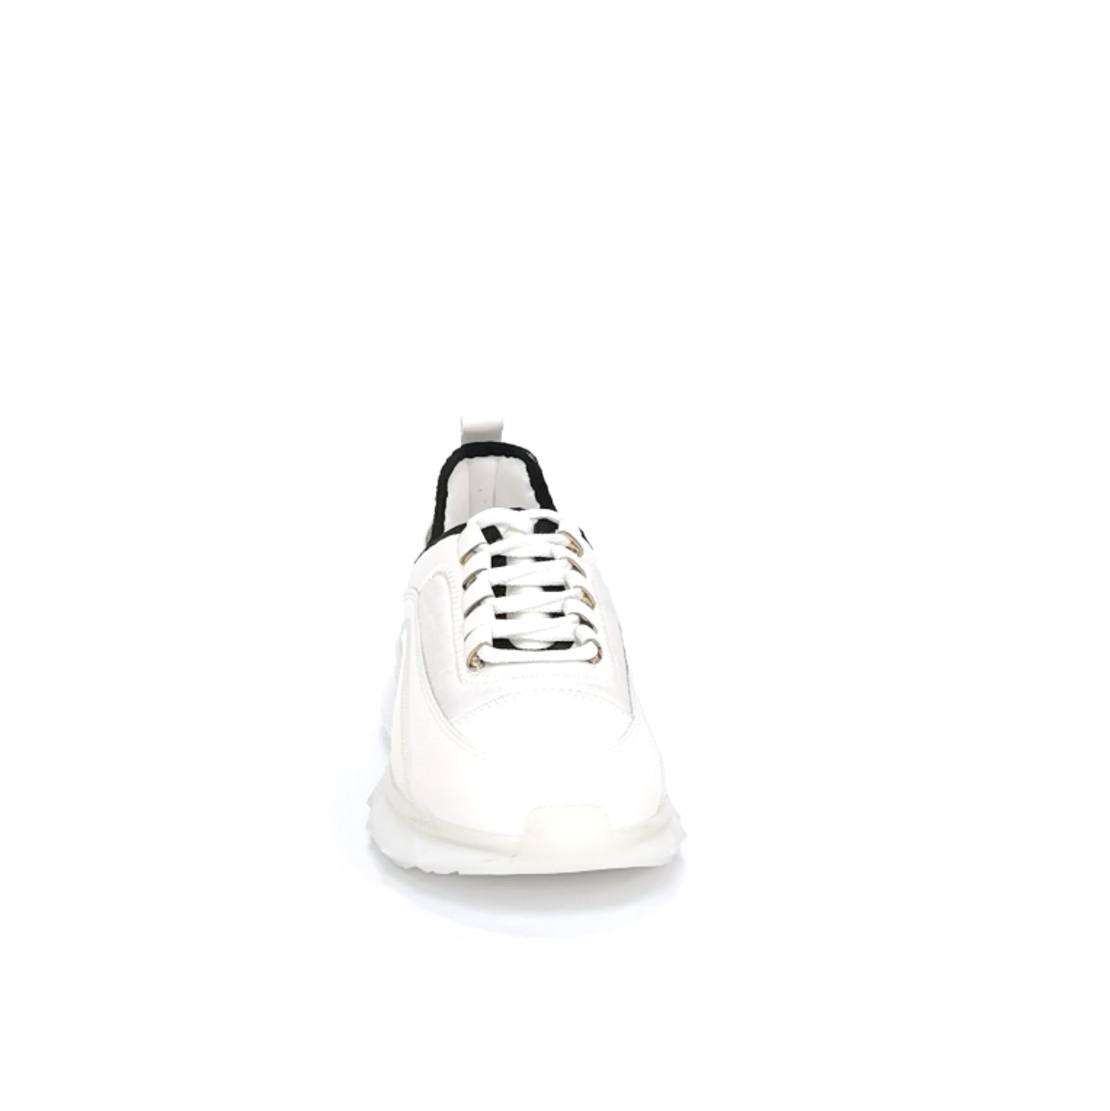 Women's sneakers made of eco leather + textile with anatomical insole in white /7282